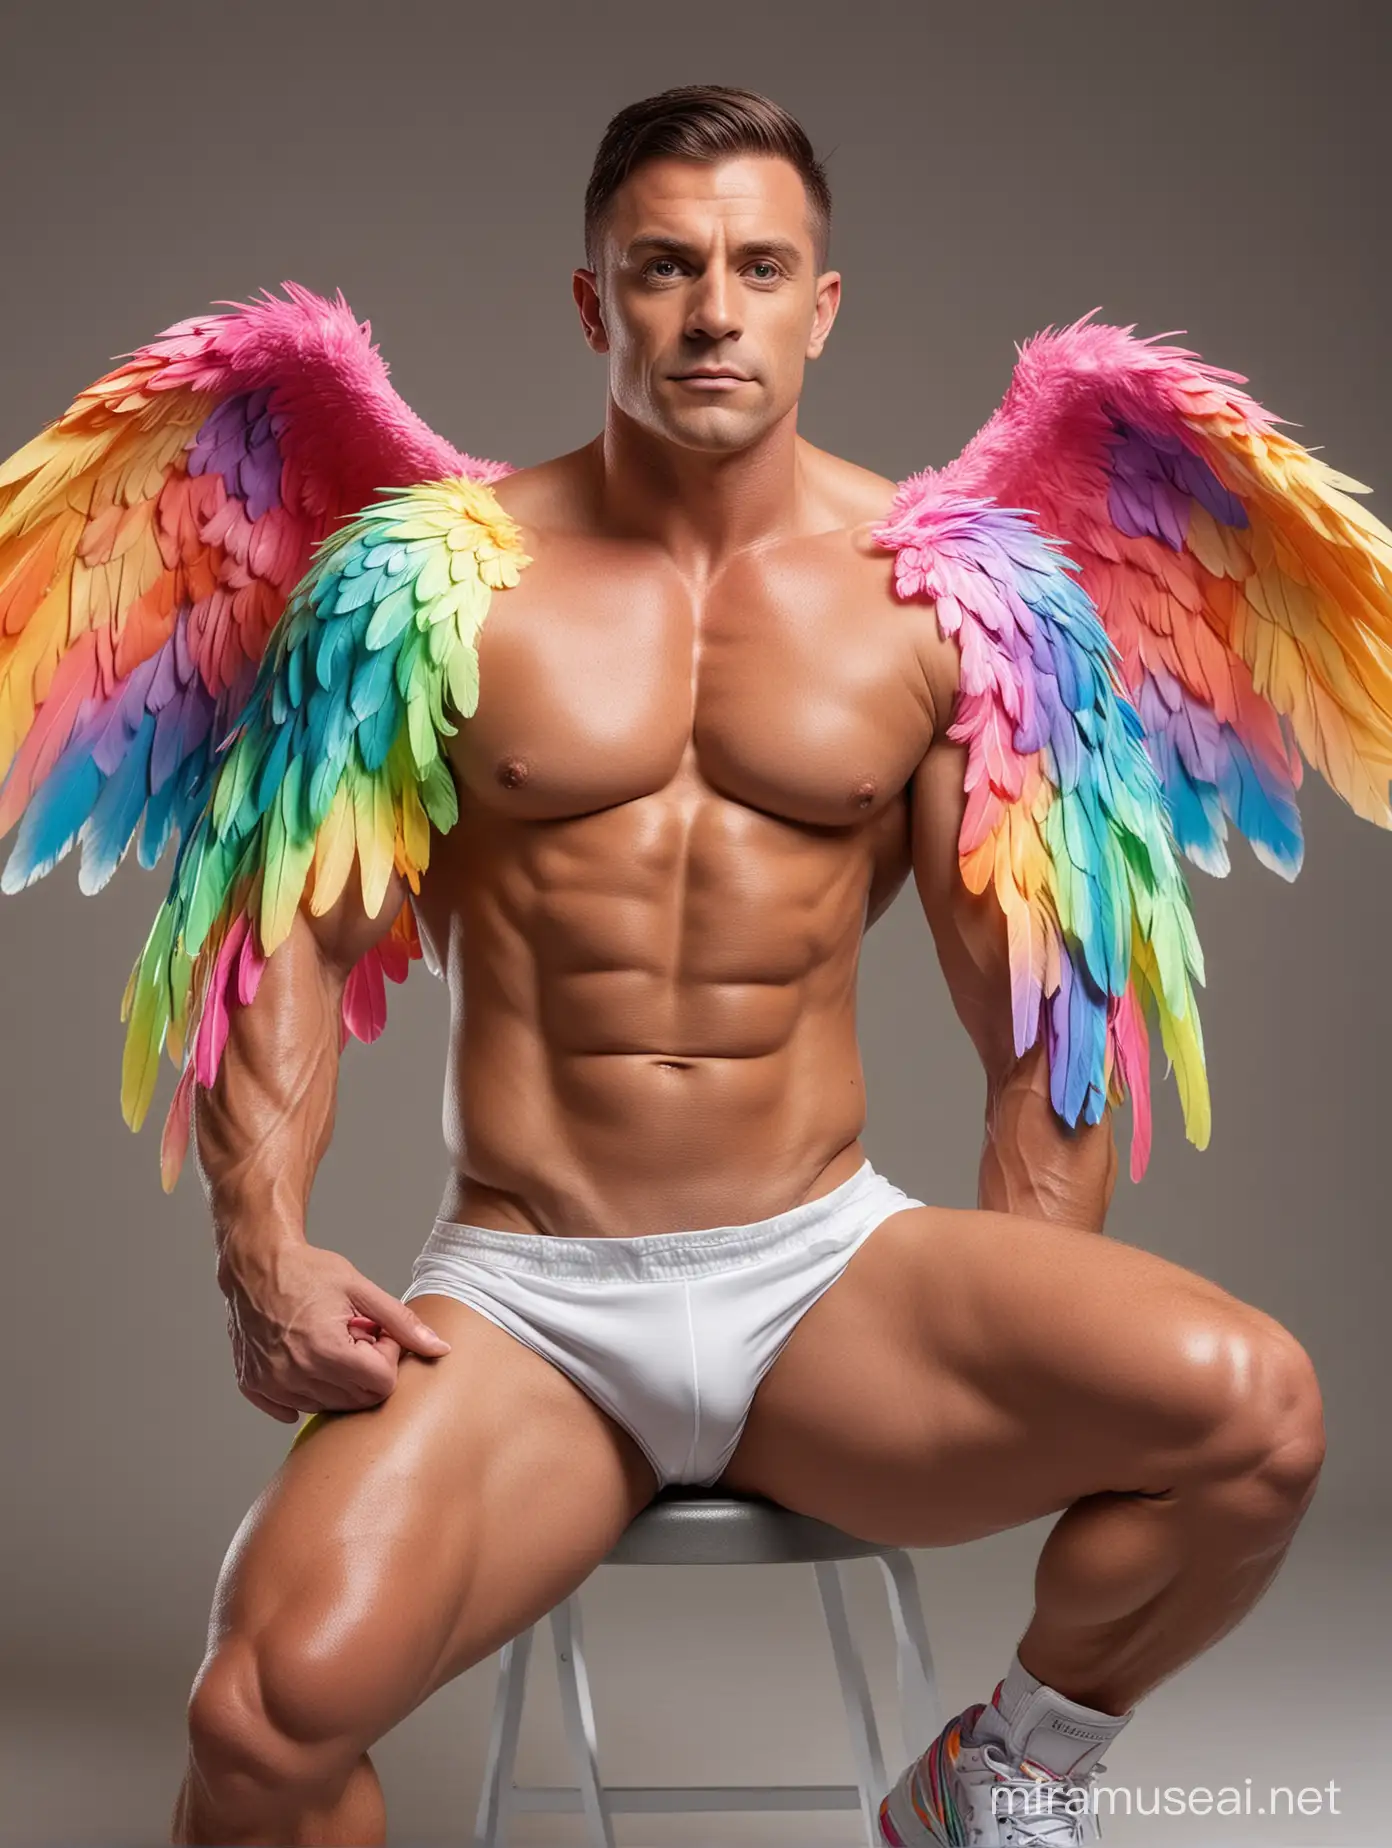 Studio Light Topless 30s Ultra Chunky IFBB Bodybuilder Daddy with Beautiful Big Eyes wearing Multi-Highlighter Bright Rainbow with white Coloured See Through Eagle Wings Shoulder LED Jacket Short shorts left arm Flexing Bicep Up Pose seating on